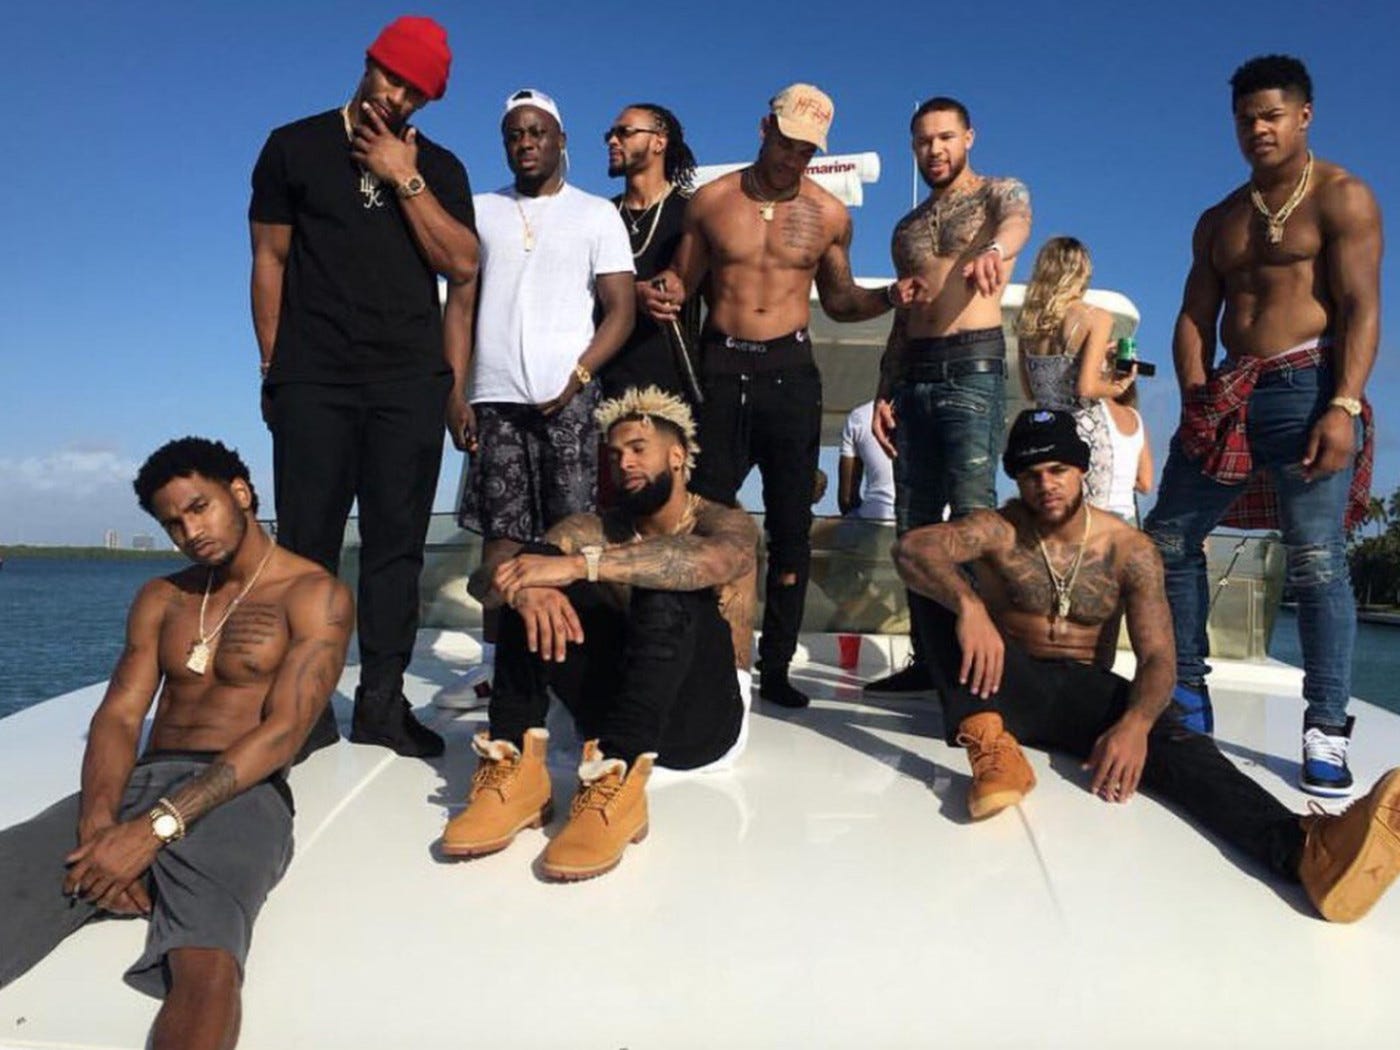 8 takeaways from the Giants' ridiculous boat photo - SBNation.com